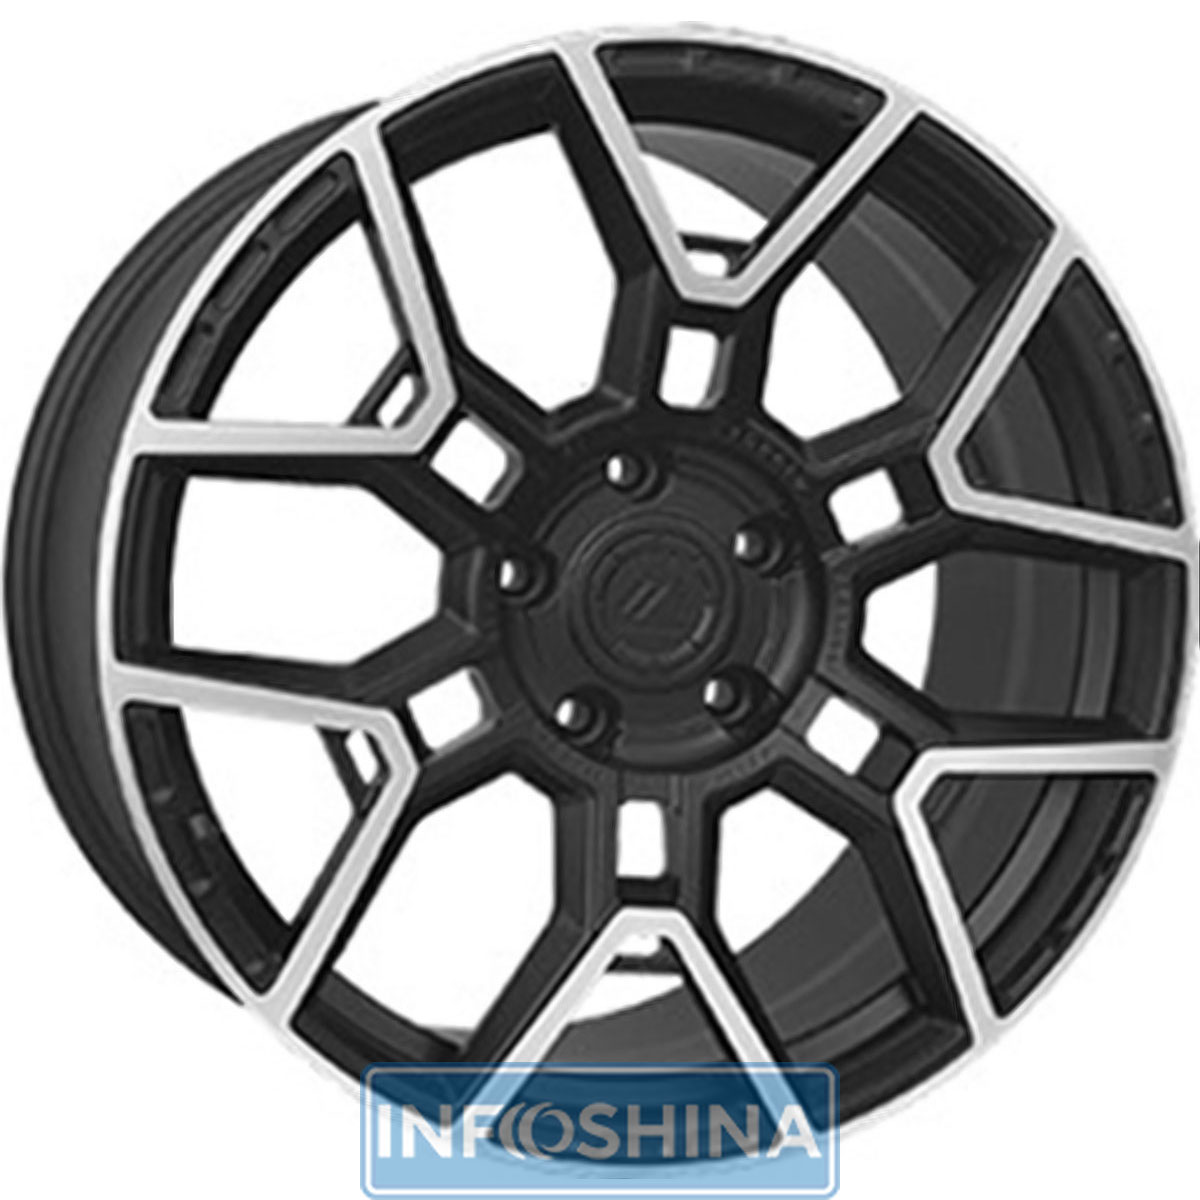 Купити диски Vissol Forged F-1120 Mate Black With Machined Face Dark Tint Matte R20 W9.5 PCD5x130 ET35 DIA84.1